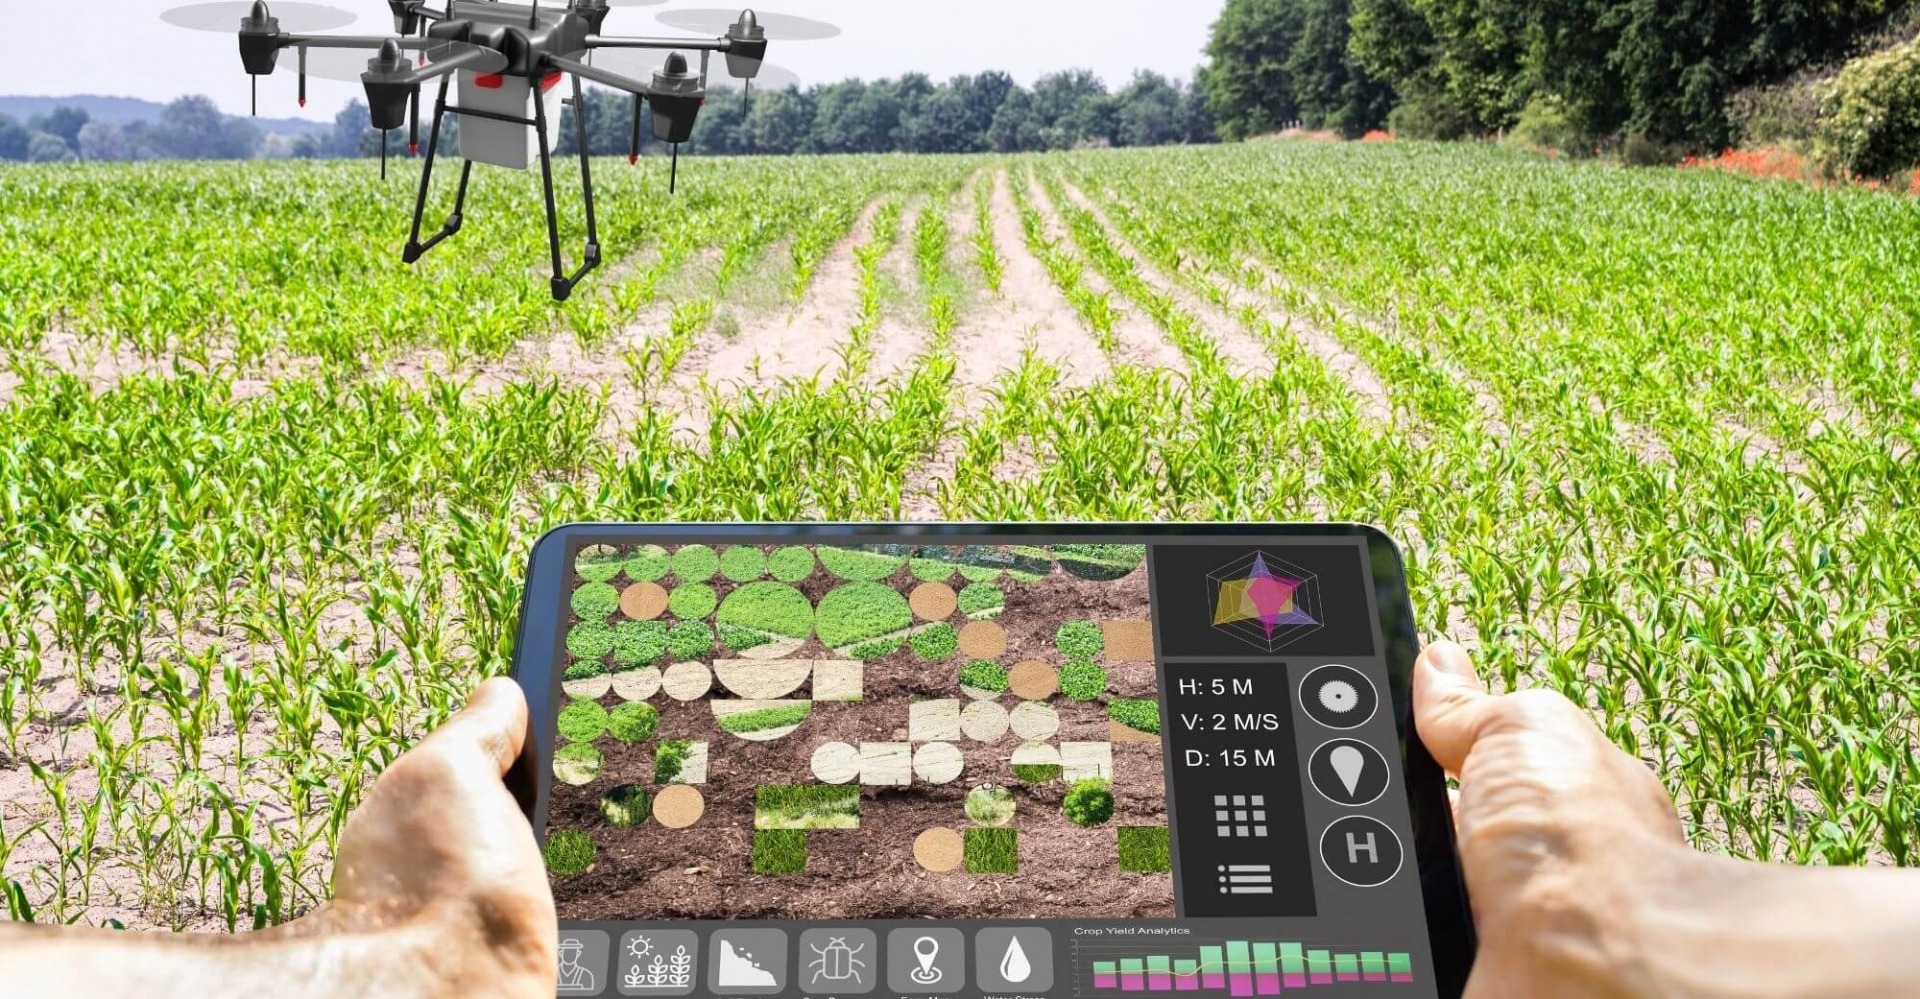 Is The Internet of Things Making Way For Smart Agriculture?